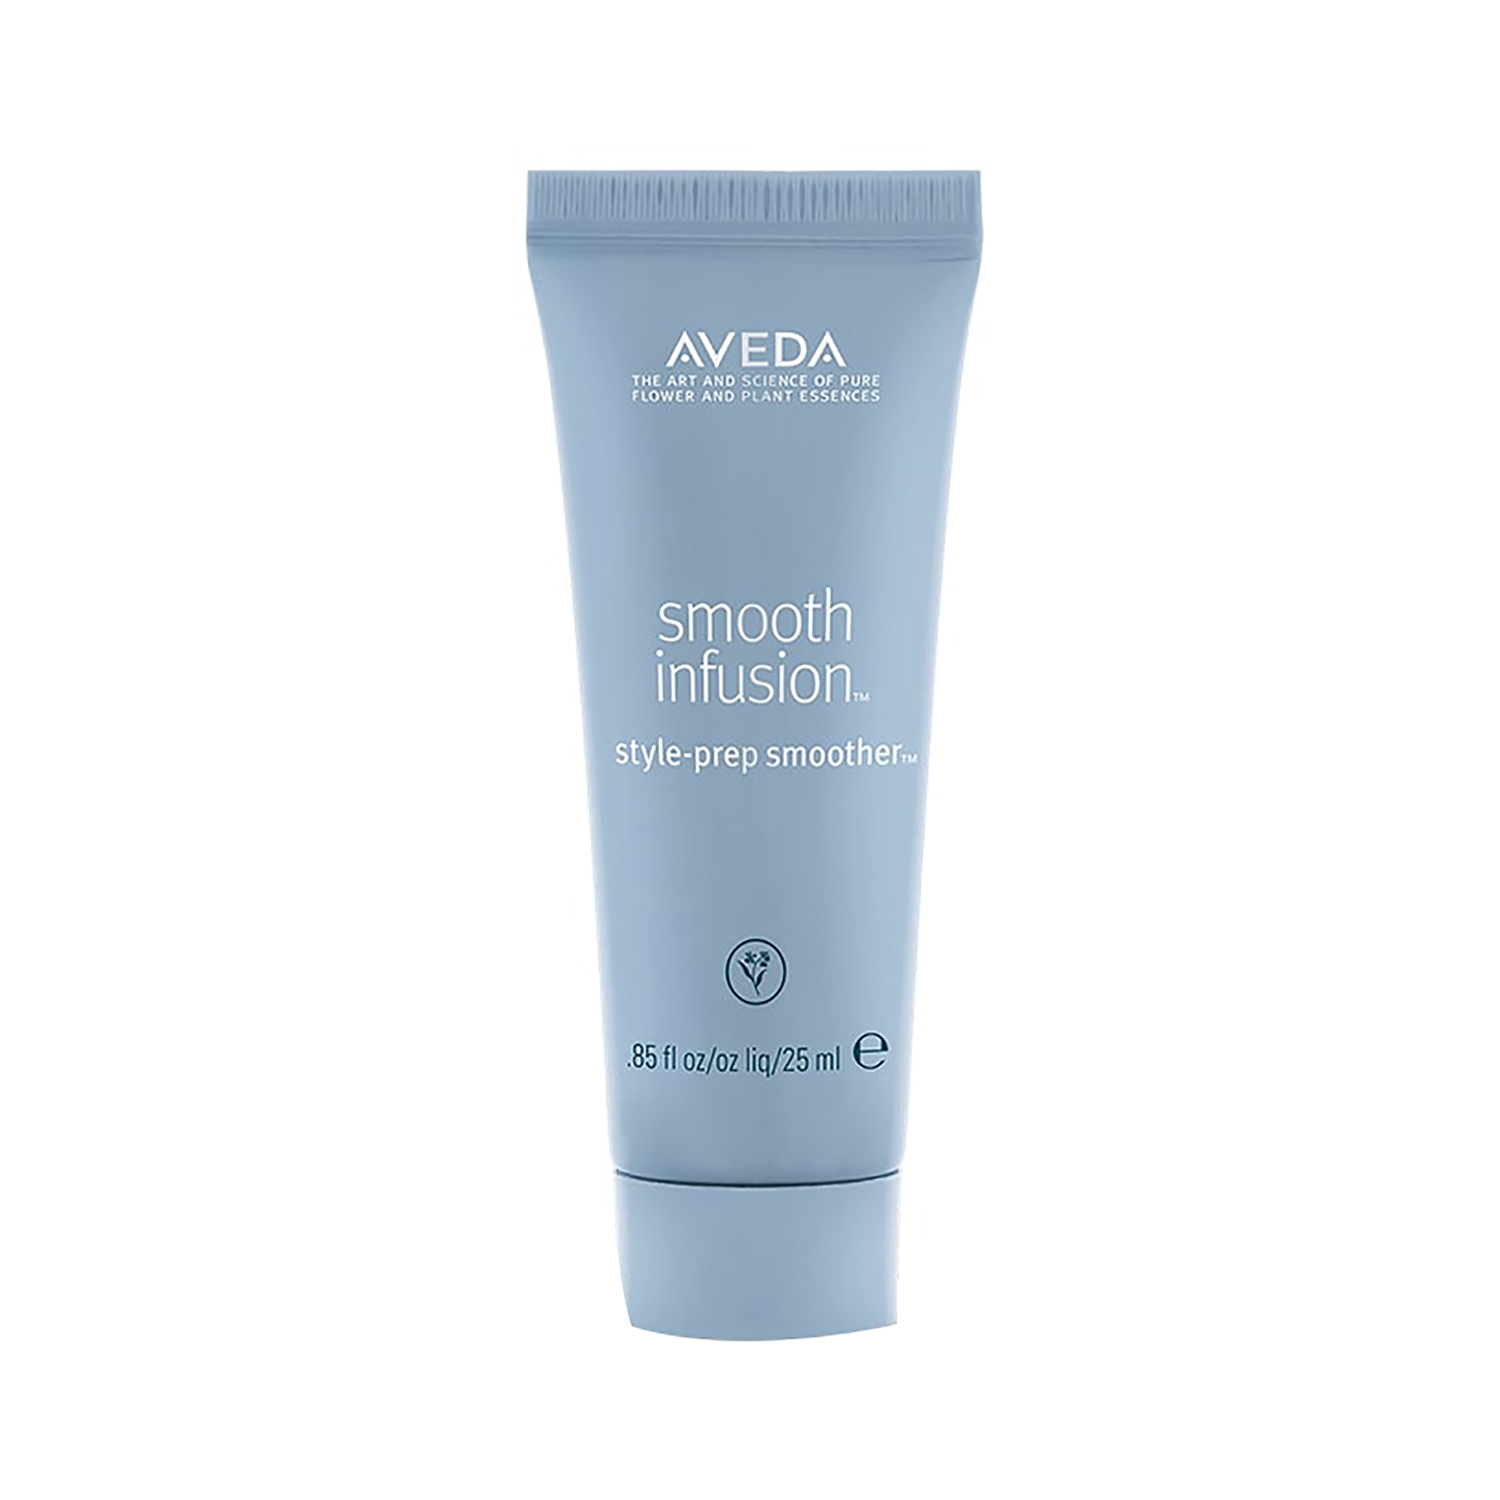 Aveda | Aveda Smooth Infusion Style Prep Smoother (25ml)